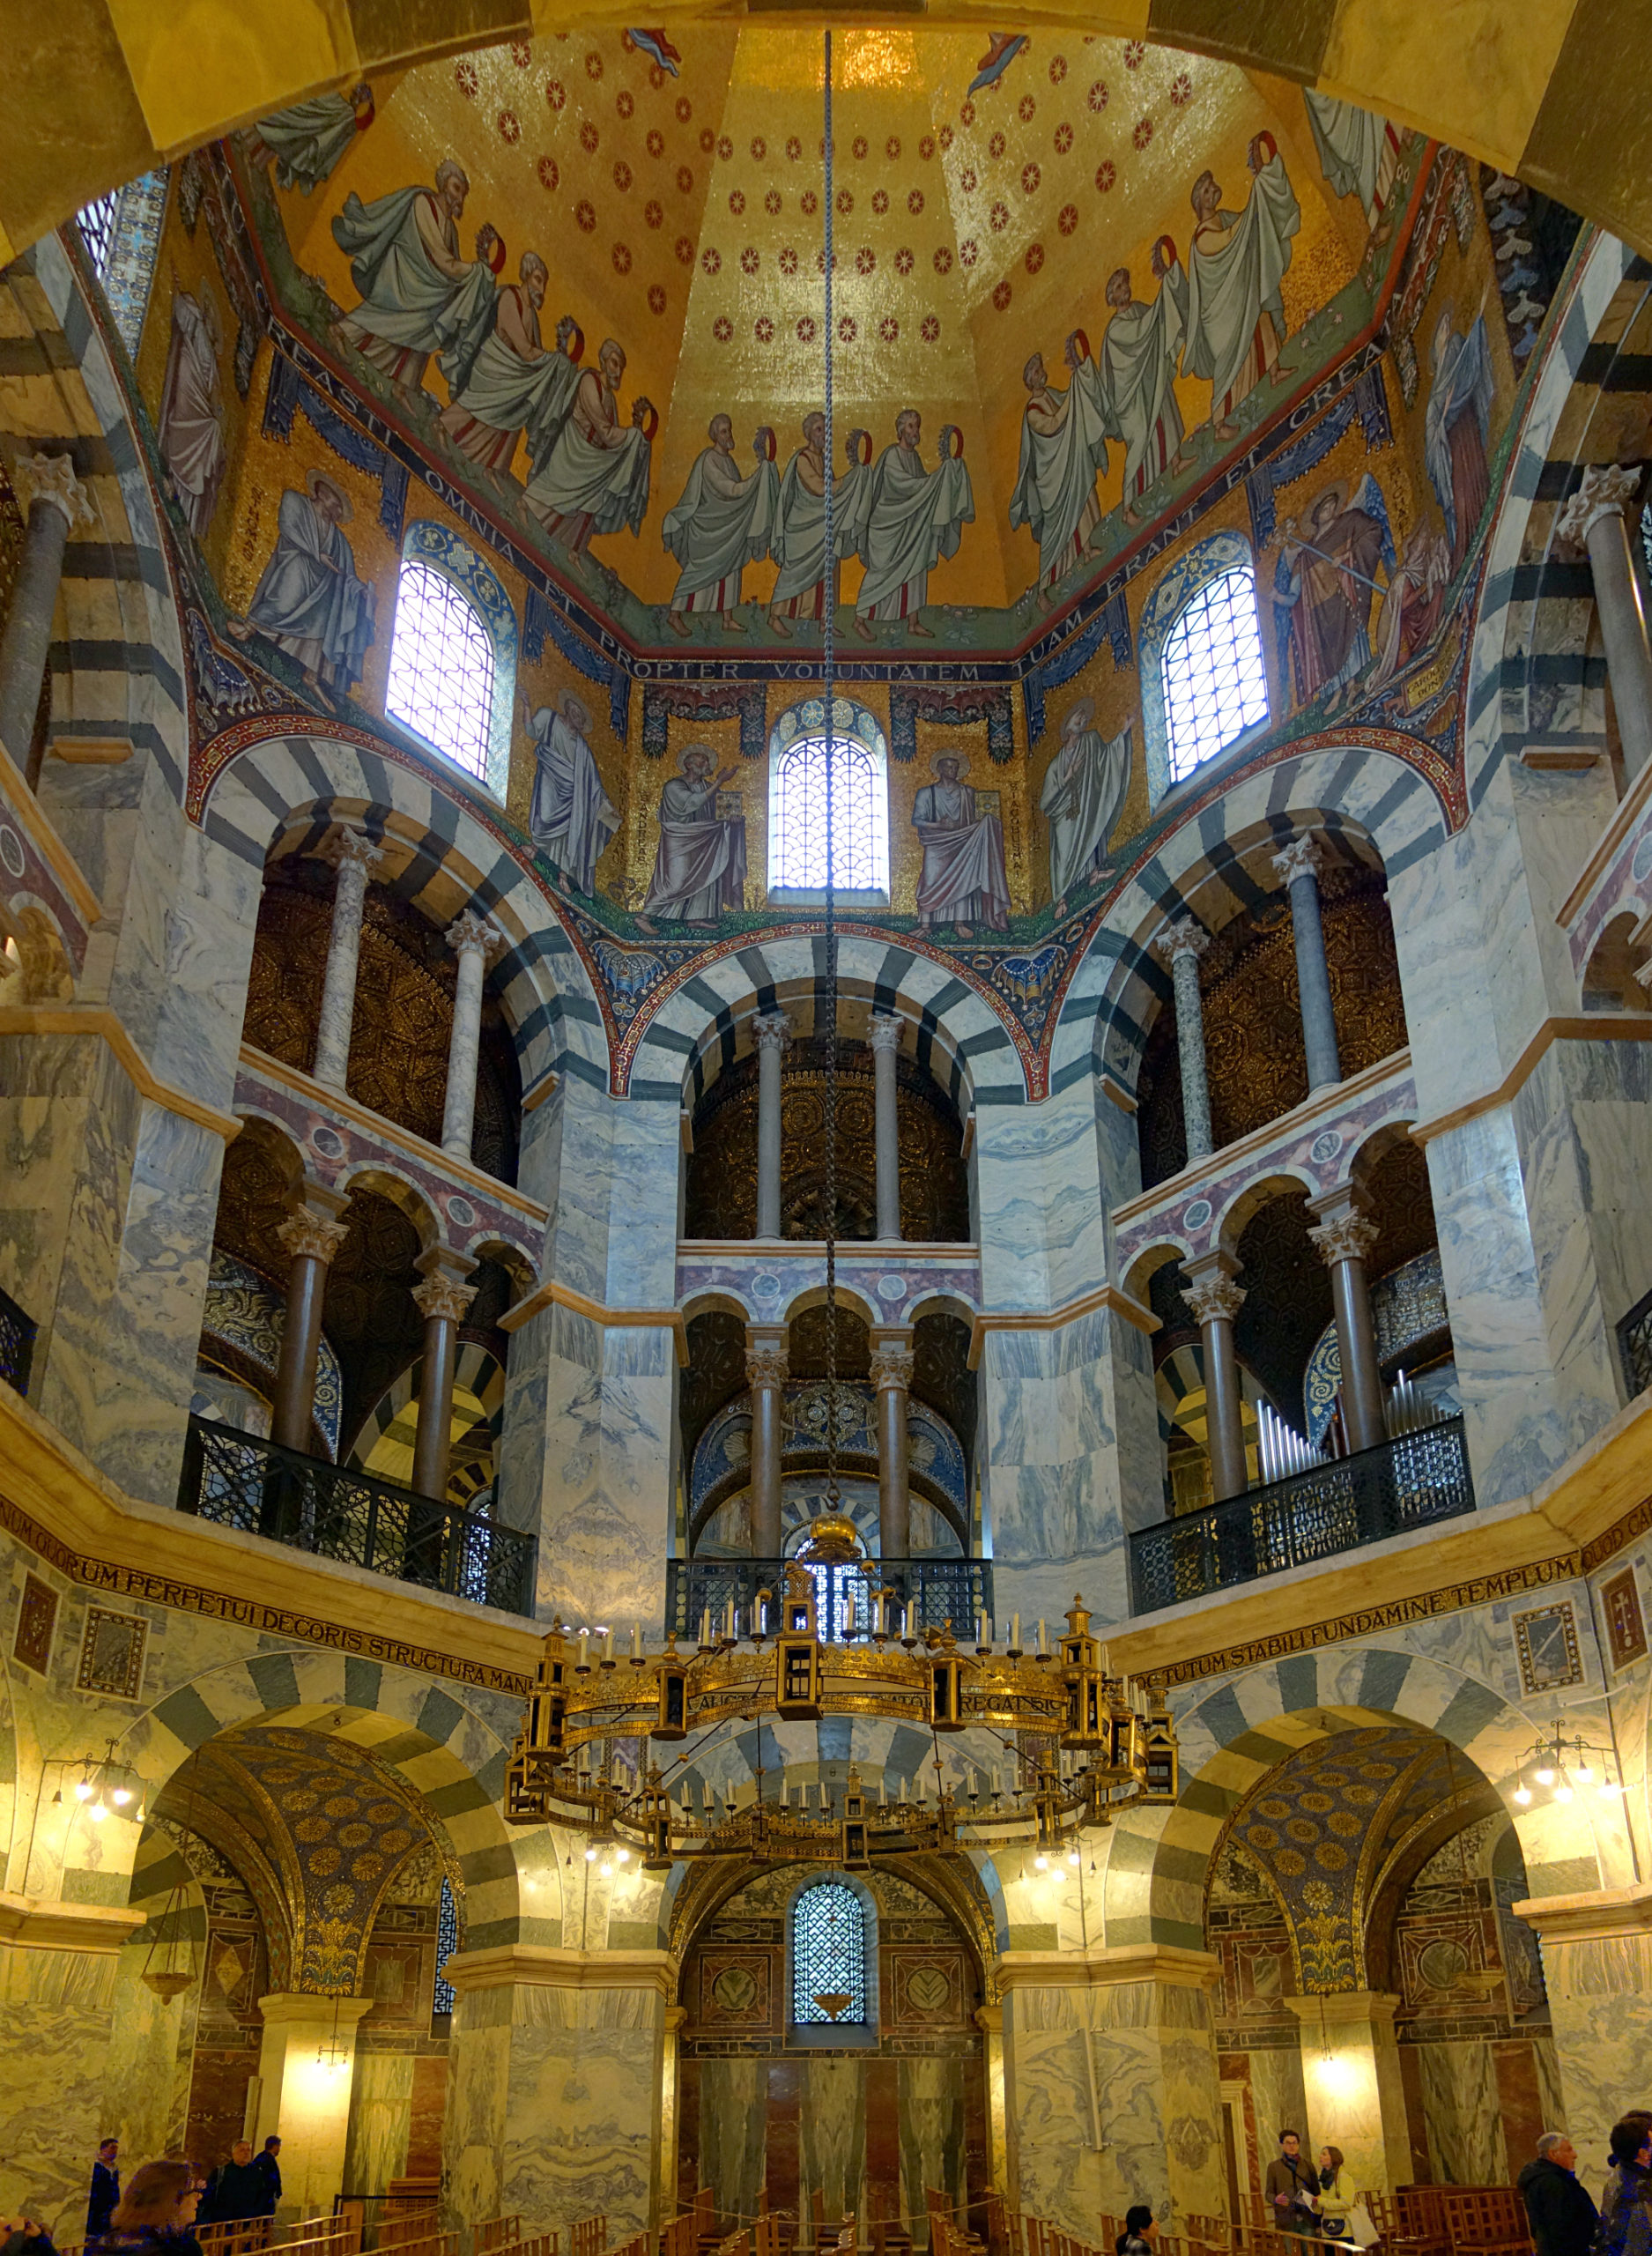 Interior of the Palatine Chapel of Charlemagne, Aachen, Germany, 792–805 (photo: Velvet, CC BY-SA 3.0)